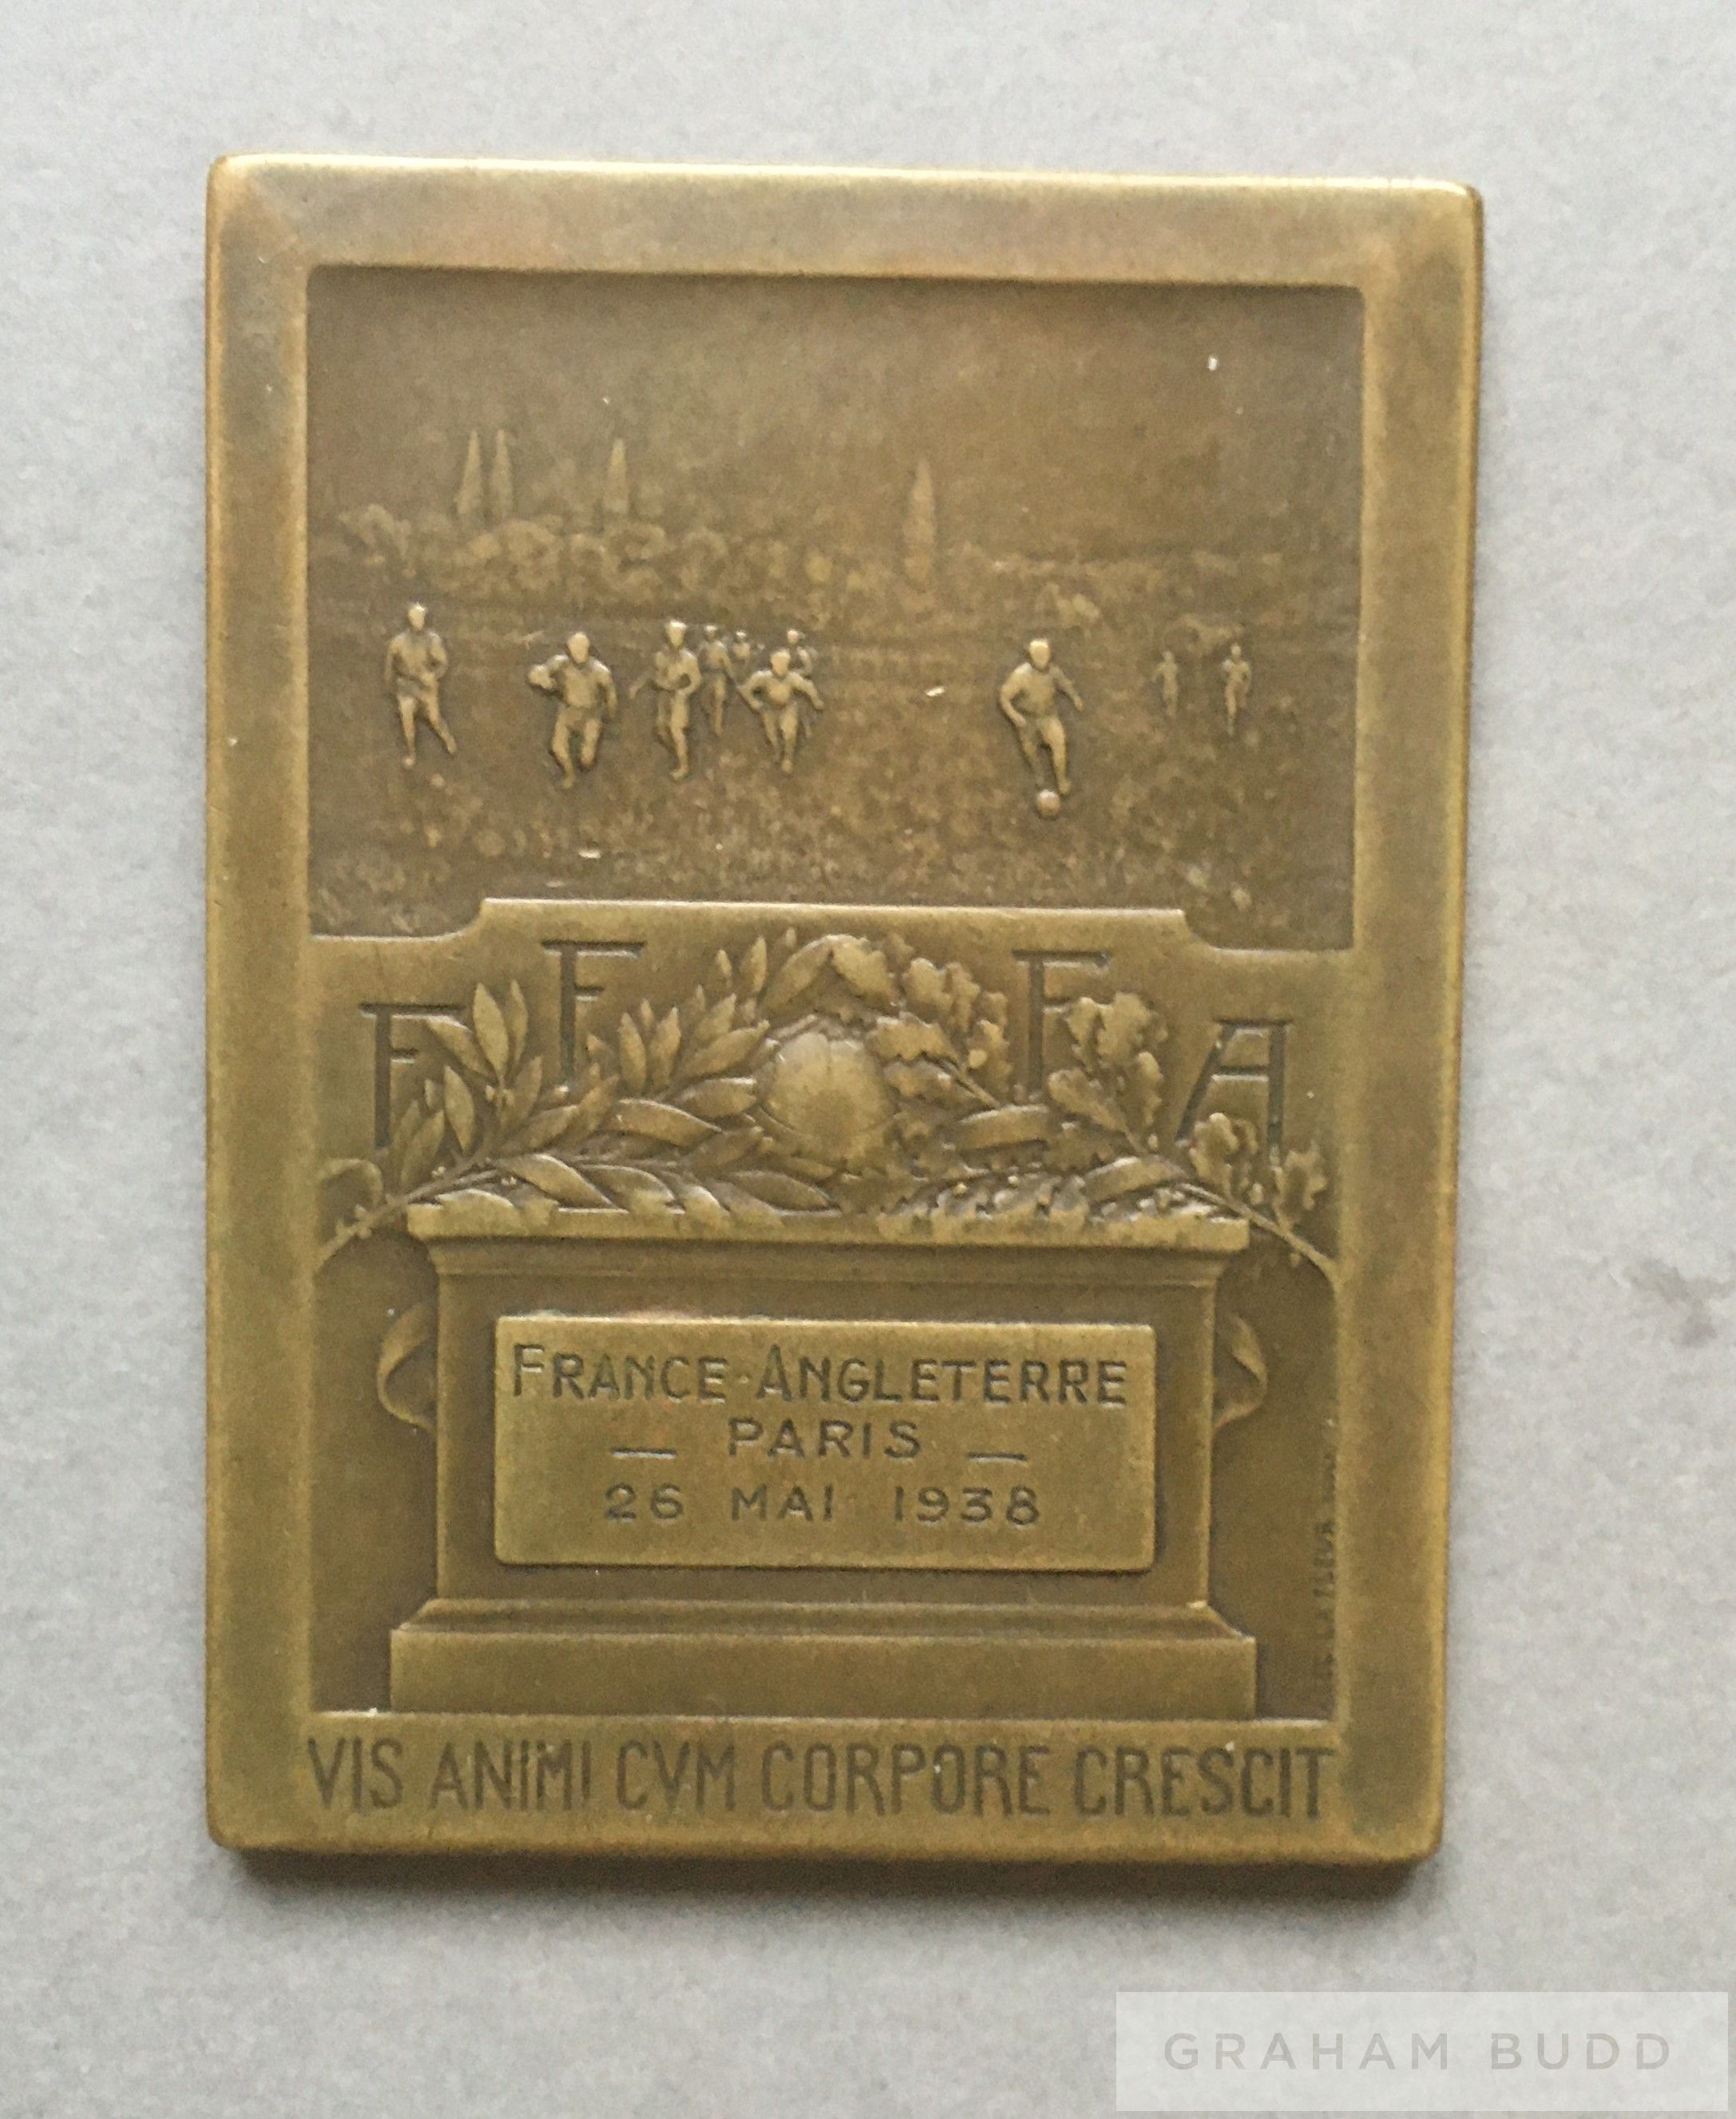 French Football Association medal plaquette for the International friendly v England in Paris, - Image 2 of 2